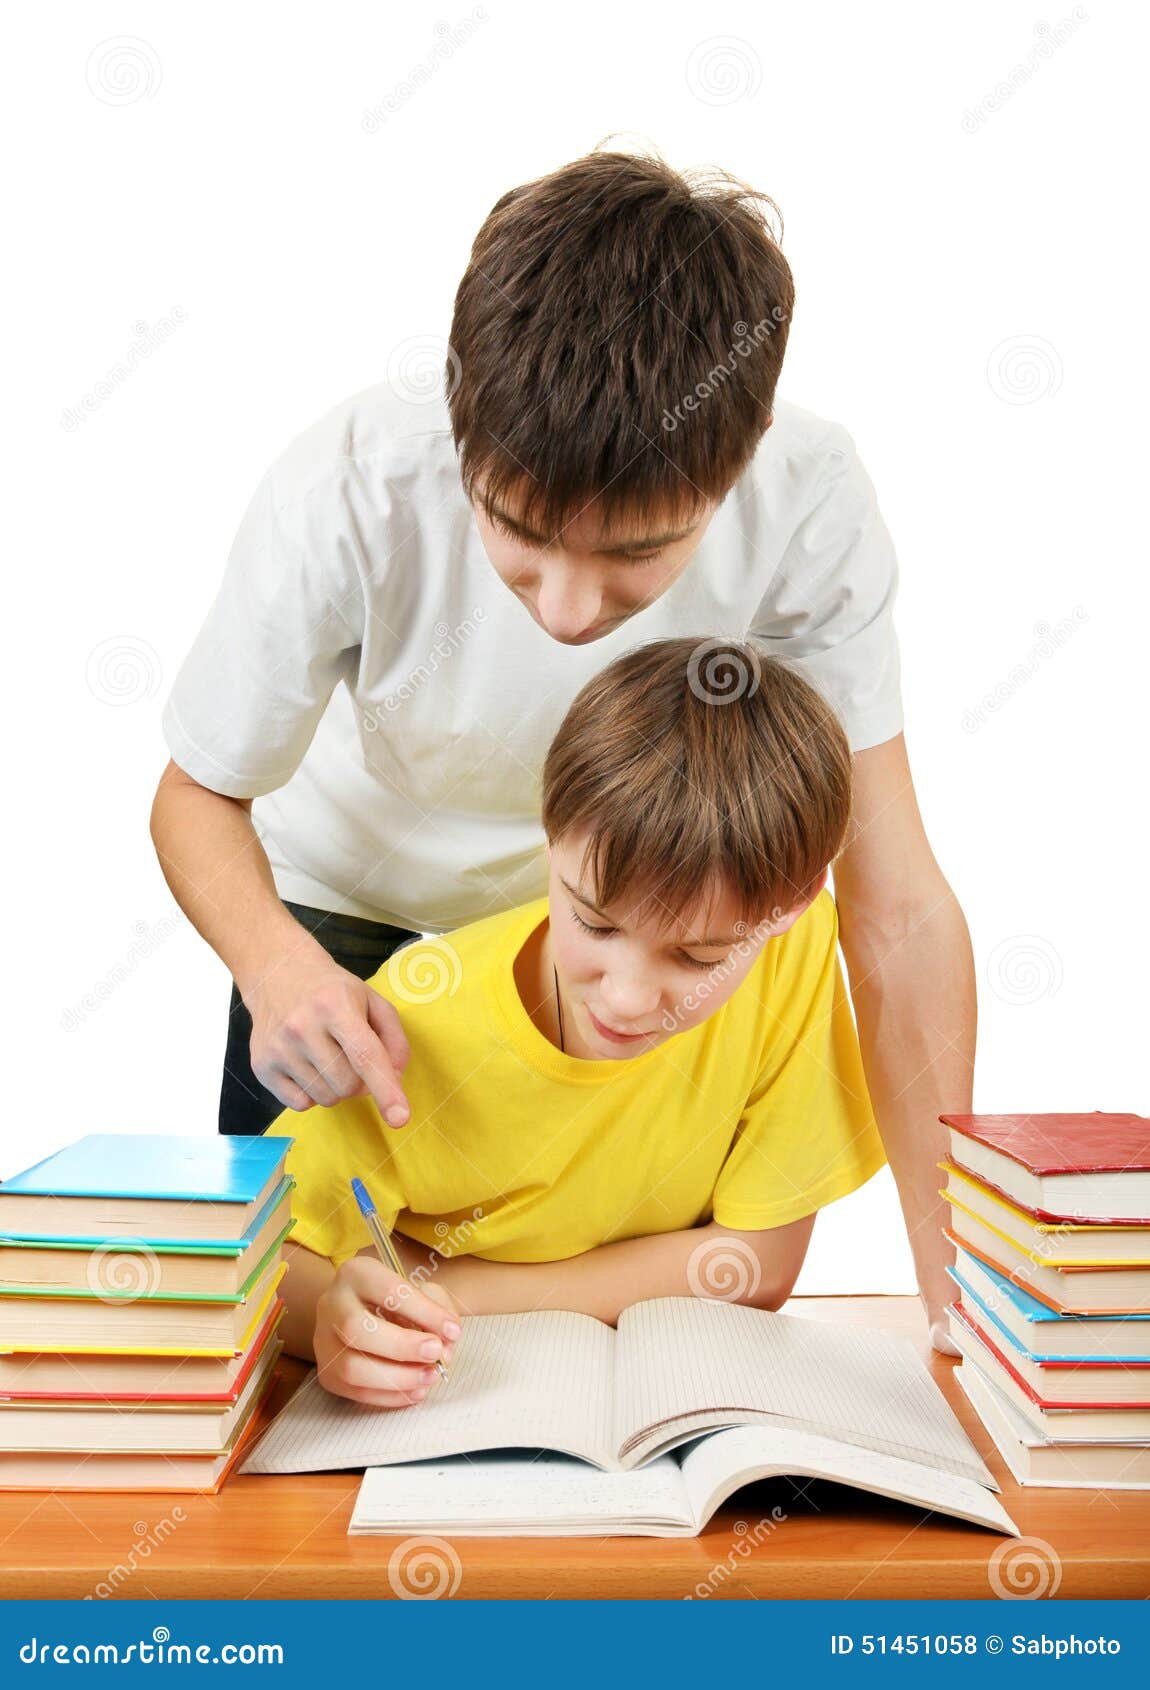 my brother often helps me ... the homework